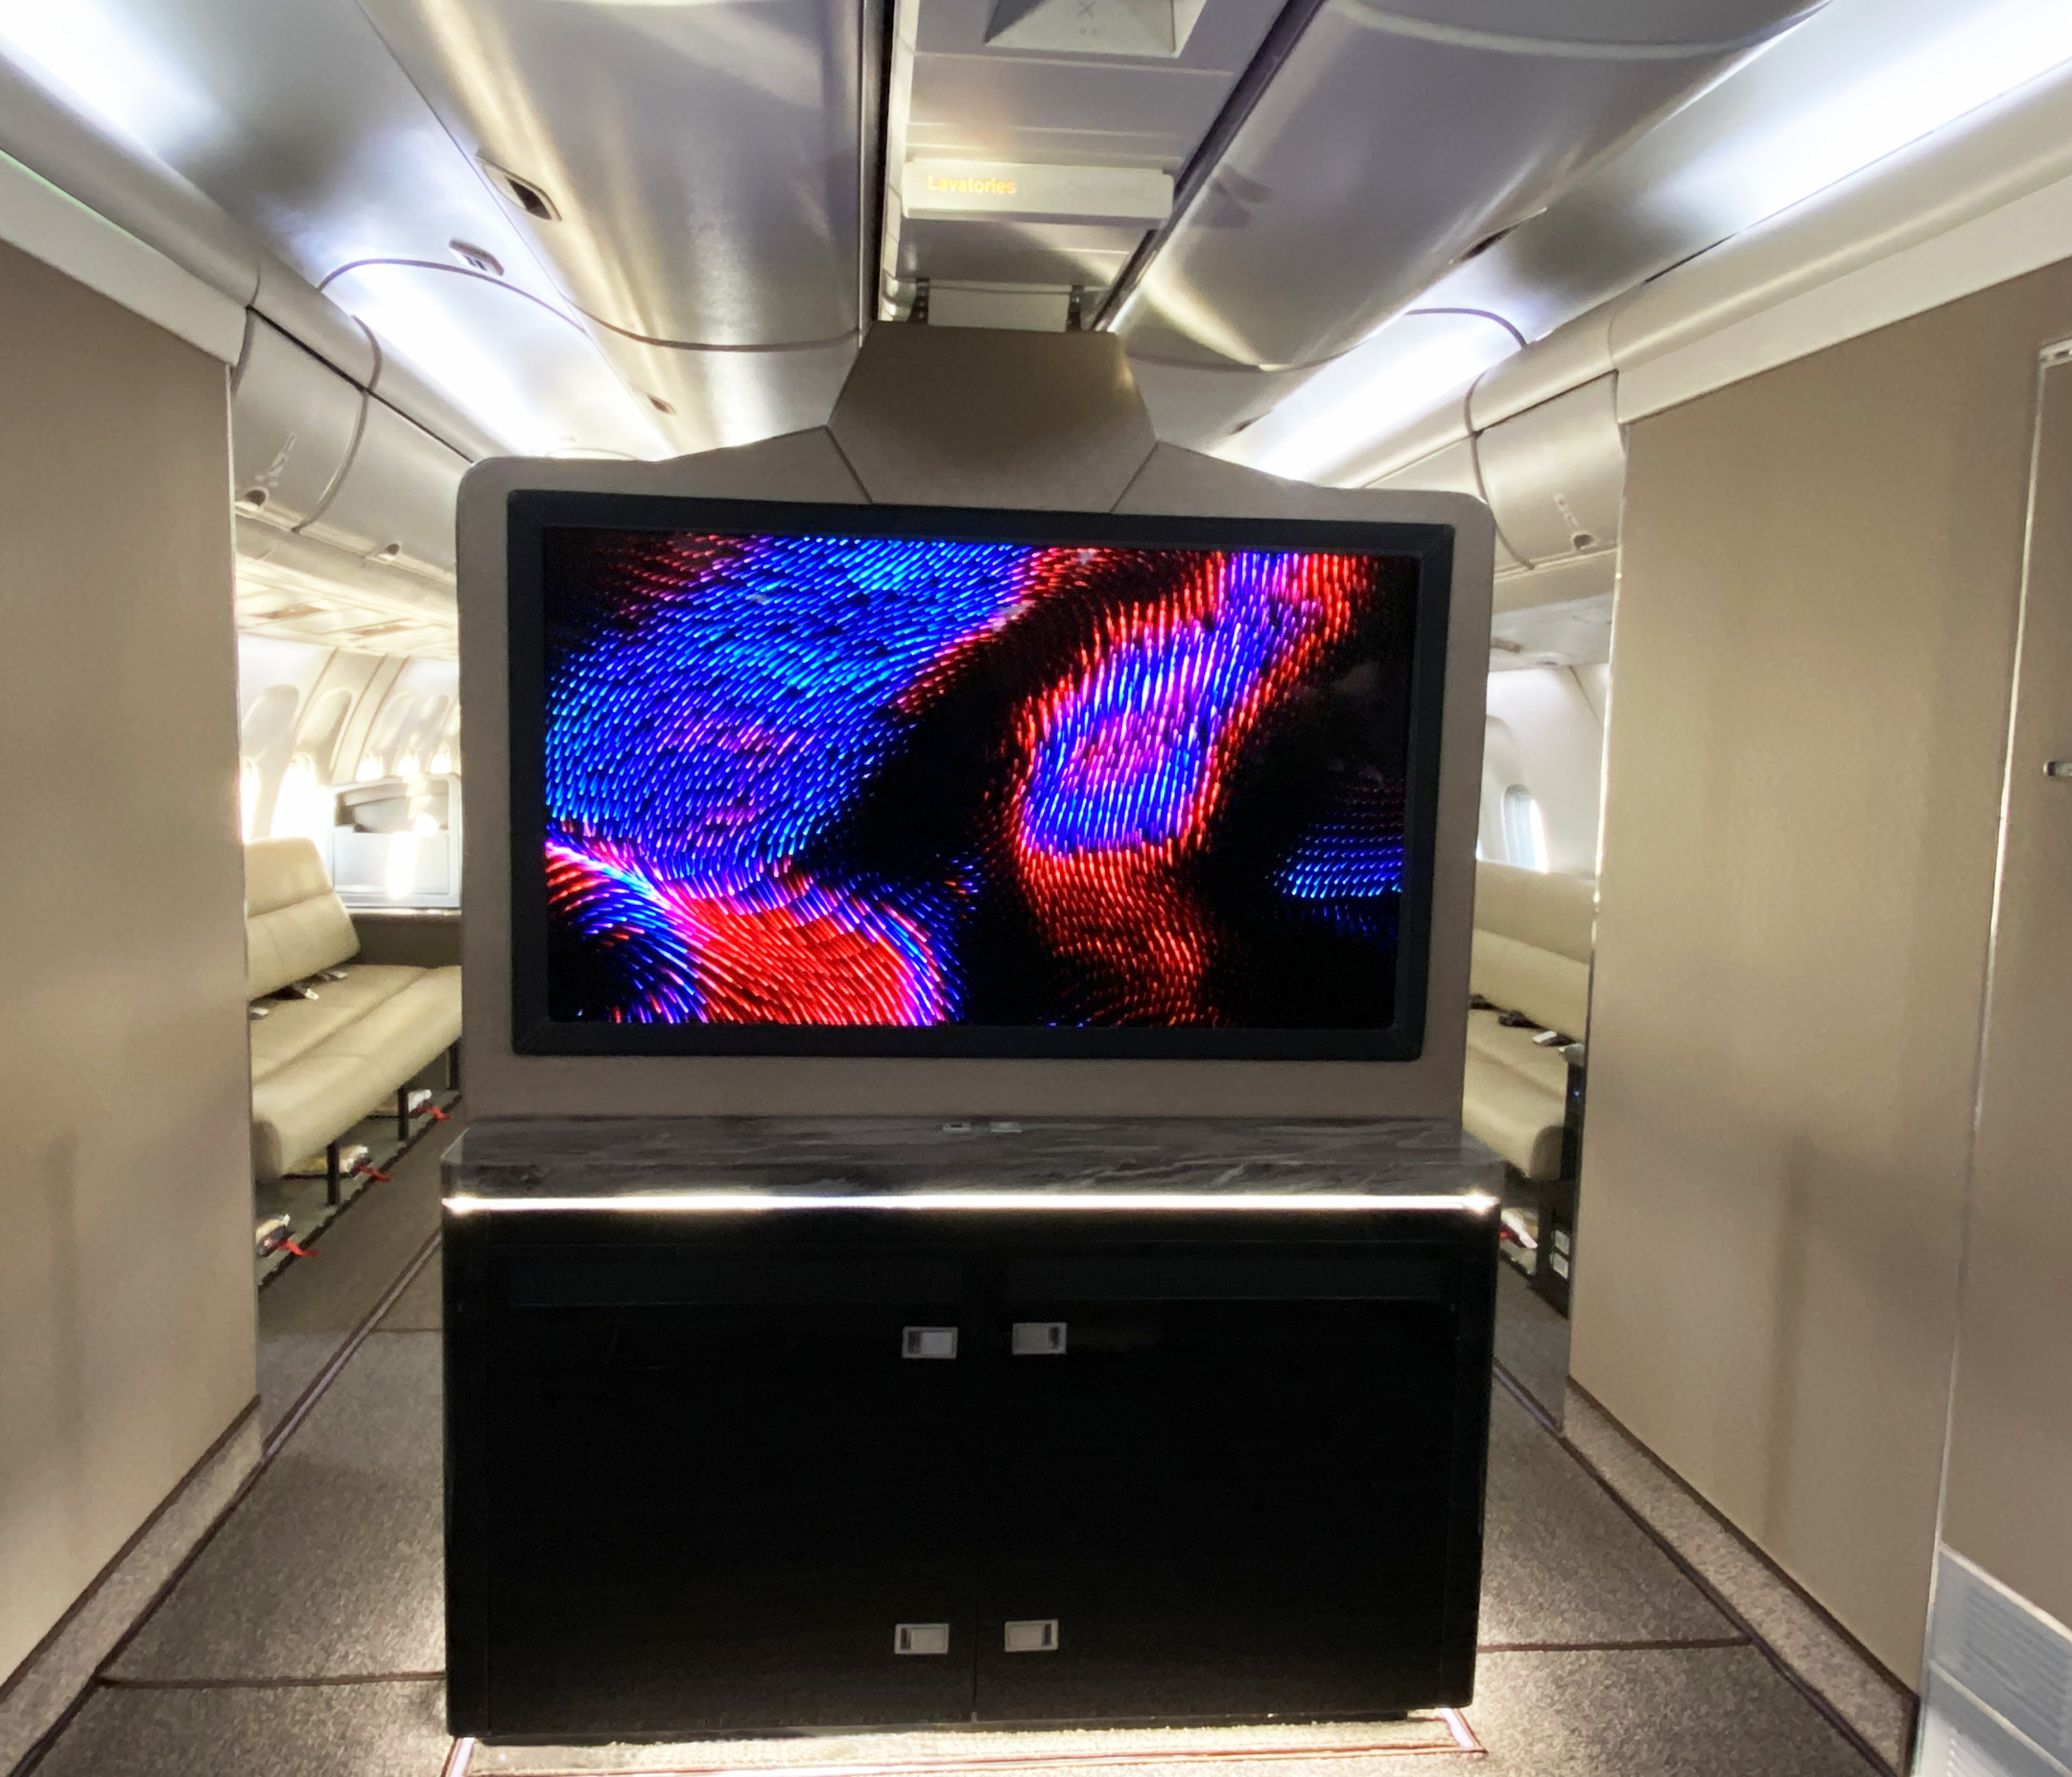 DPI Labs SmartCanvas 55" OLED UHD 4K cab display shown here installed on a Boeing 767.